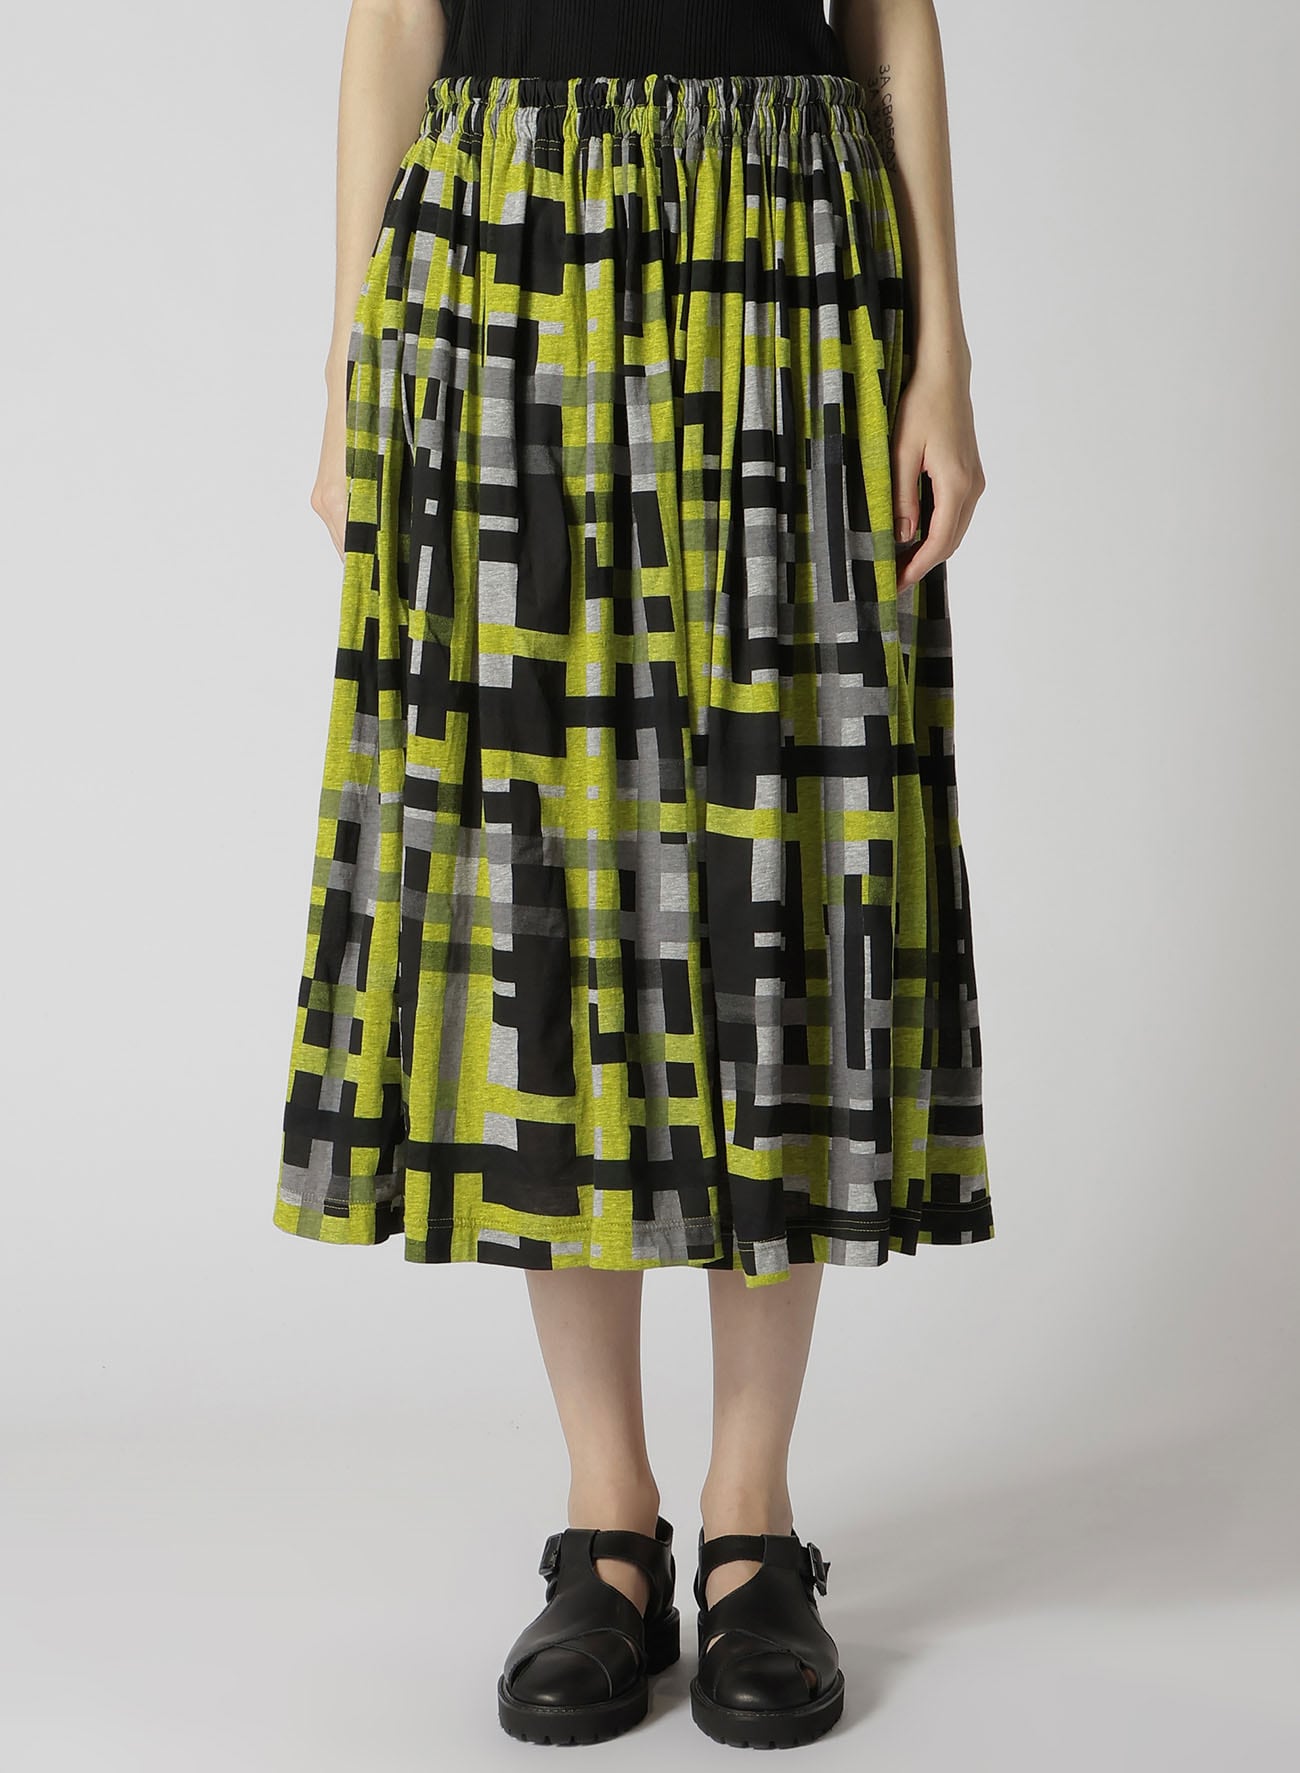 JERSEY PIGMENT CHECK PRINT GATHERED SKIRT(S Yellow): Y's｜THE SHOP 